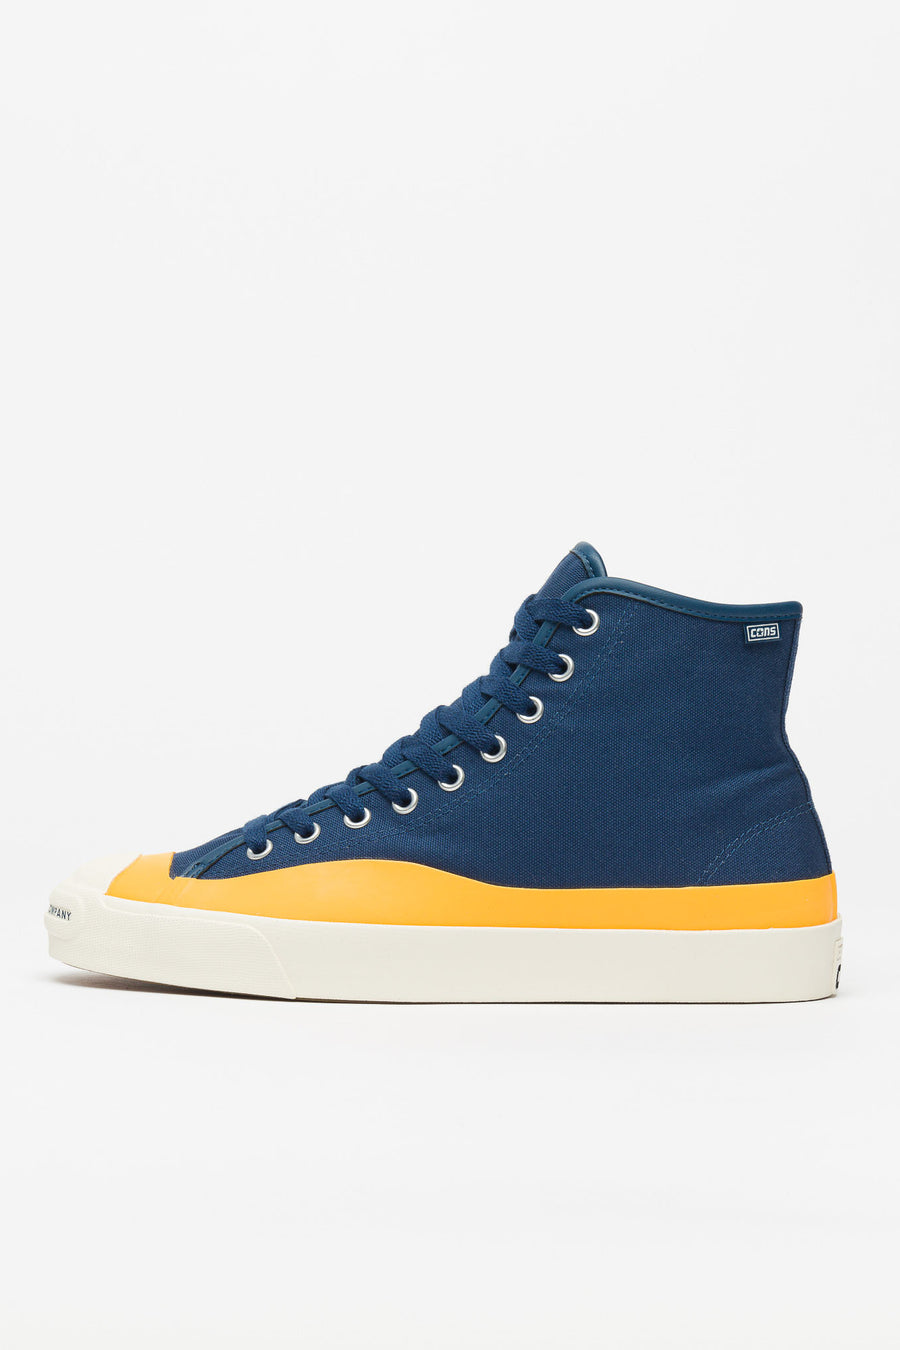 jack purcell yellow